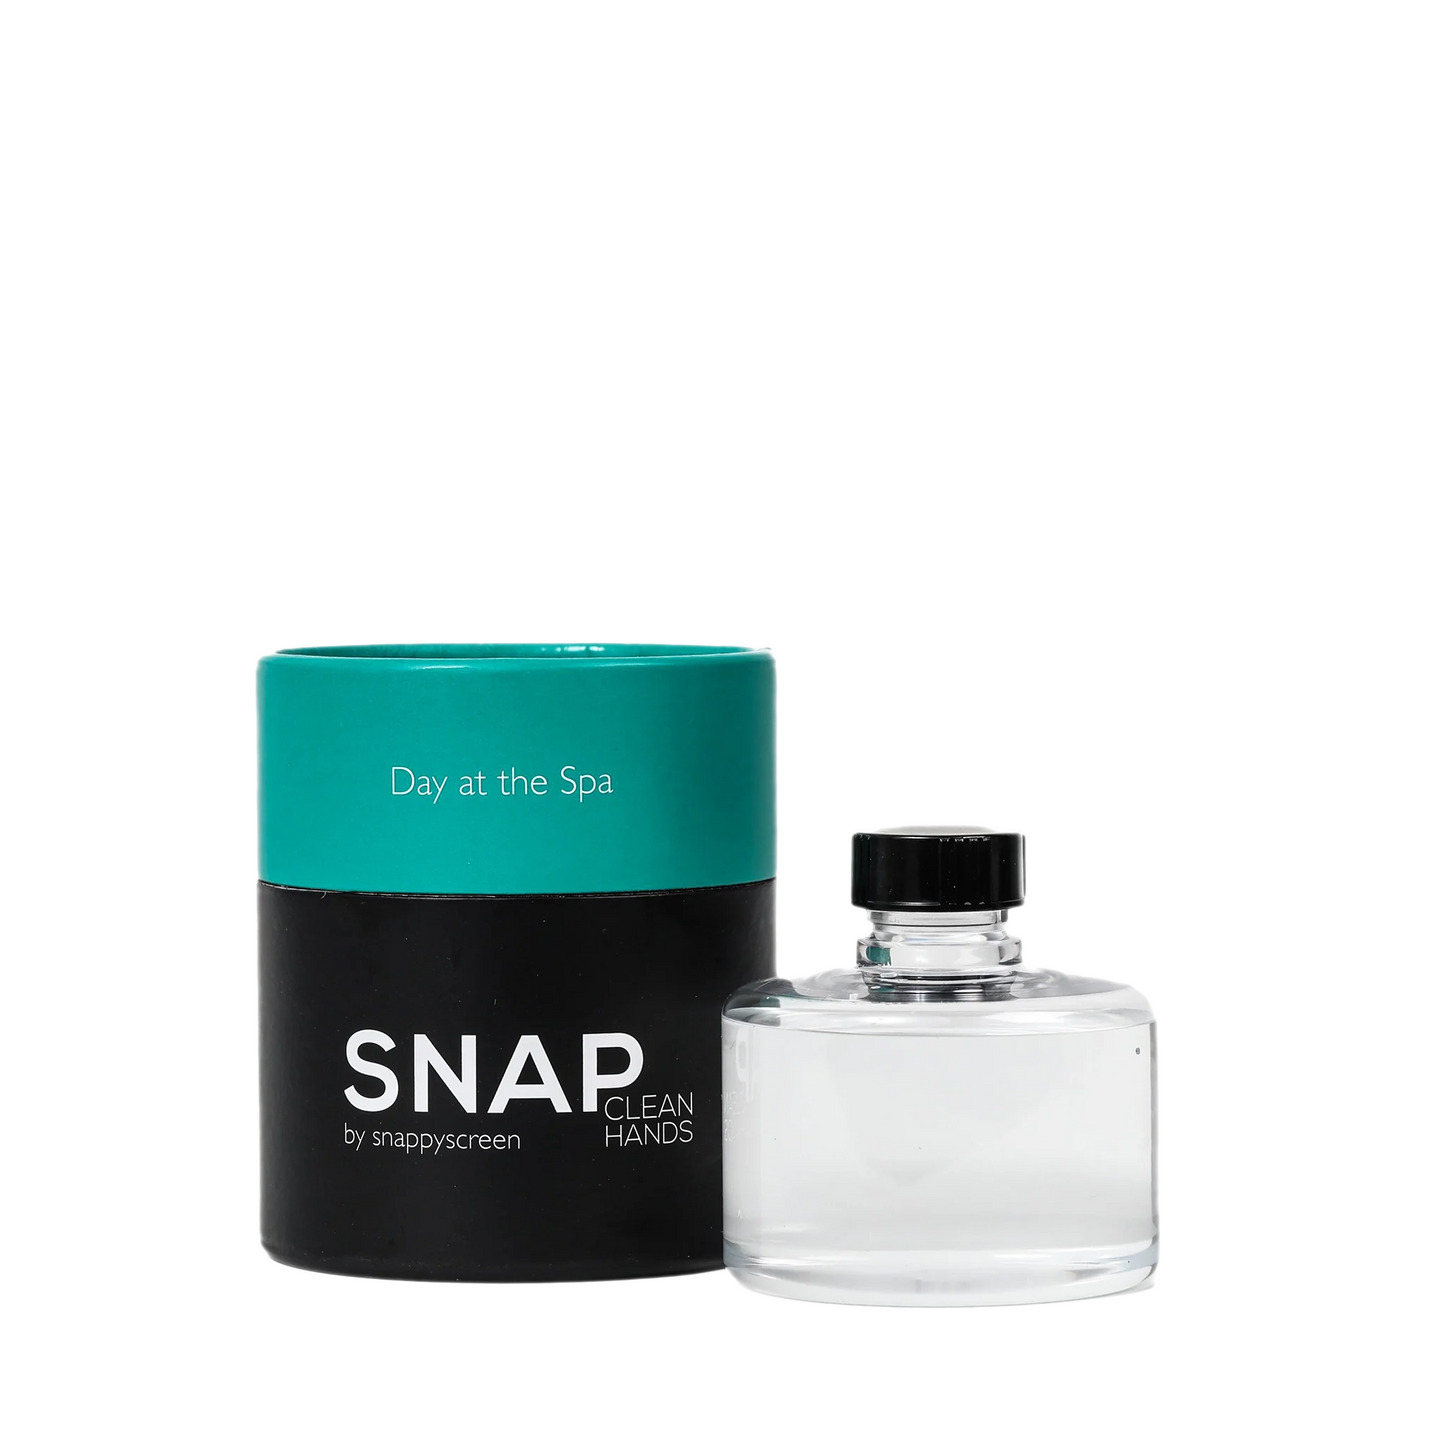 PREORDER SNAP Wellness Touchless Refills